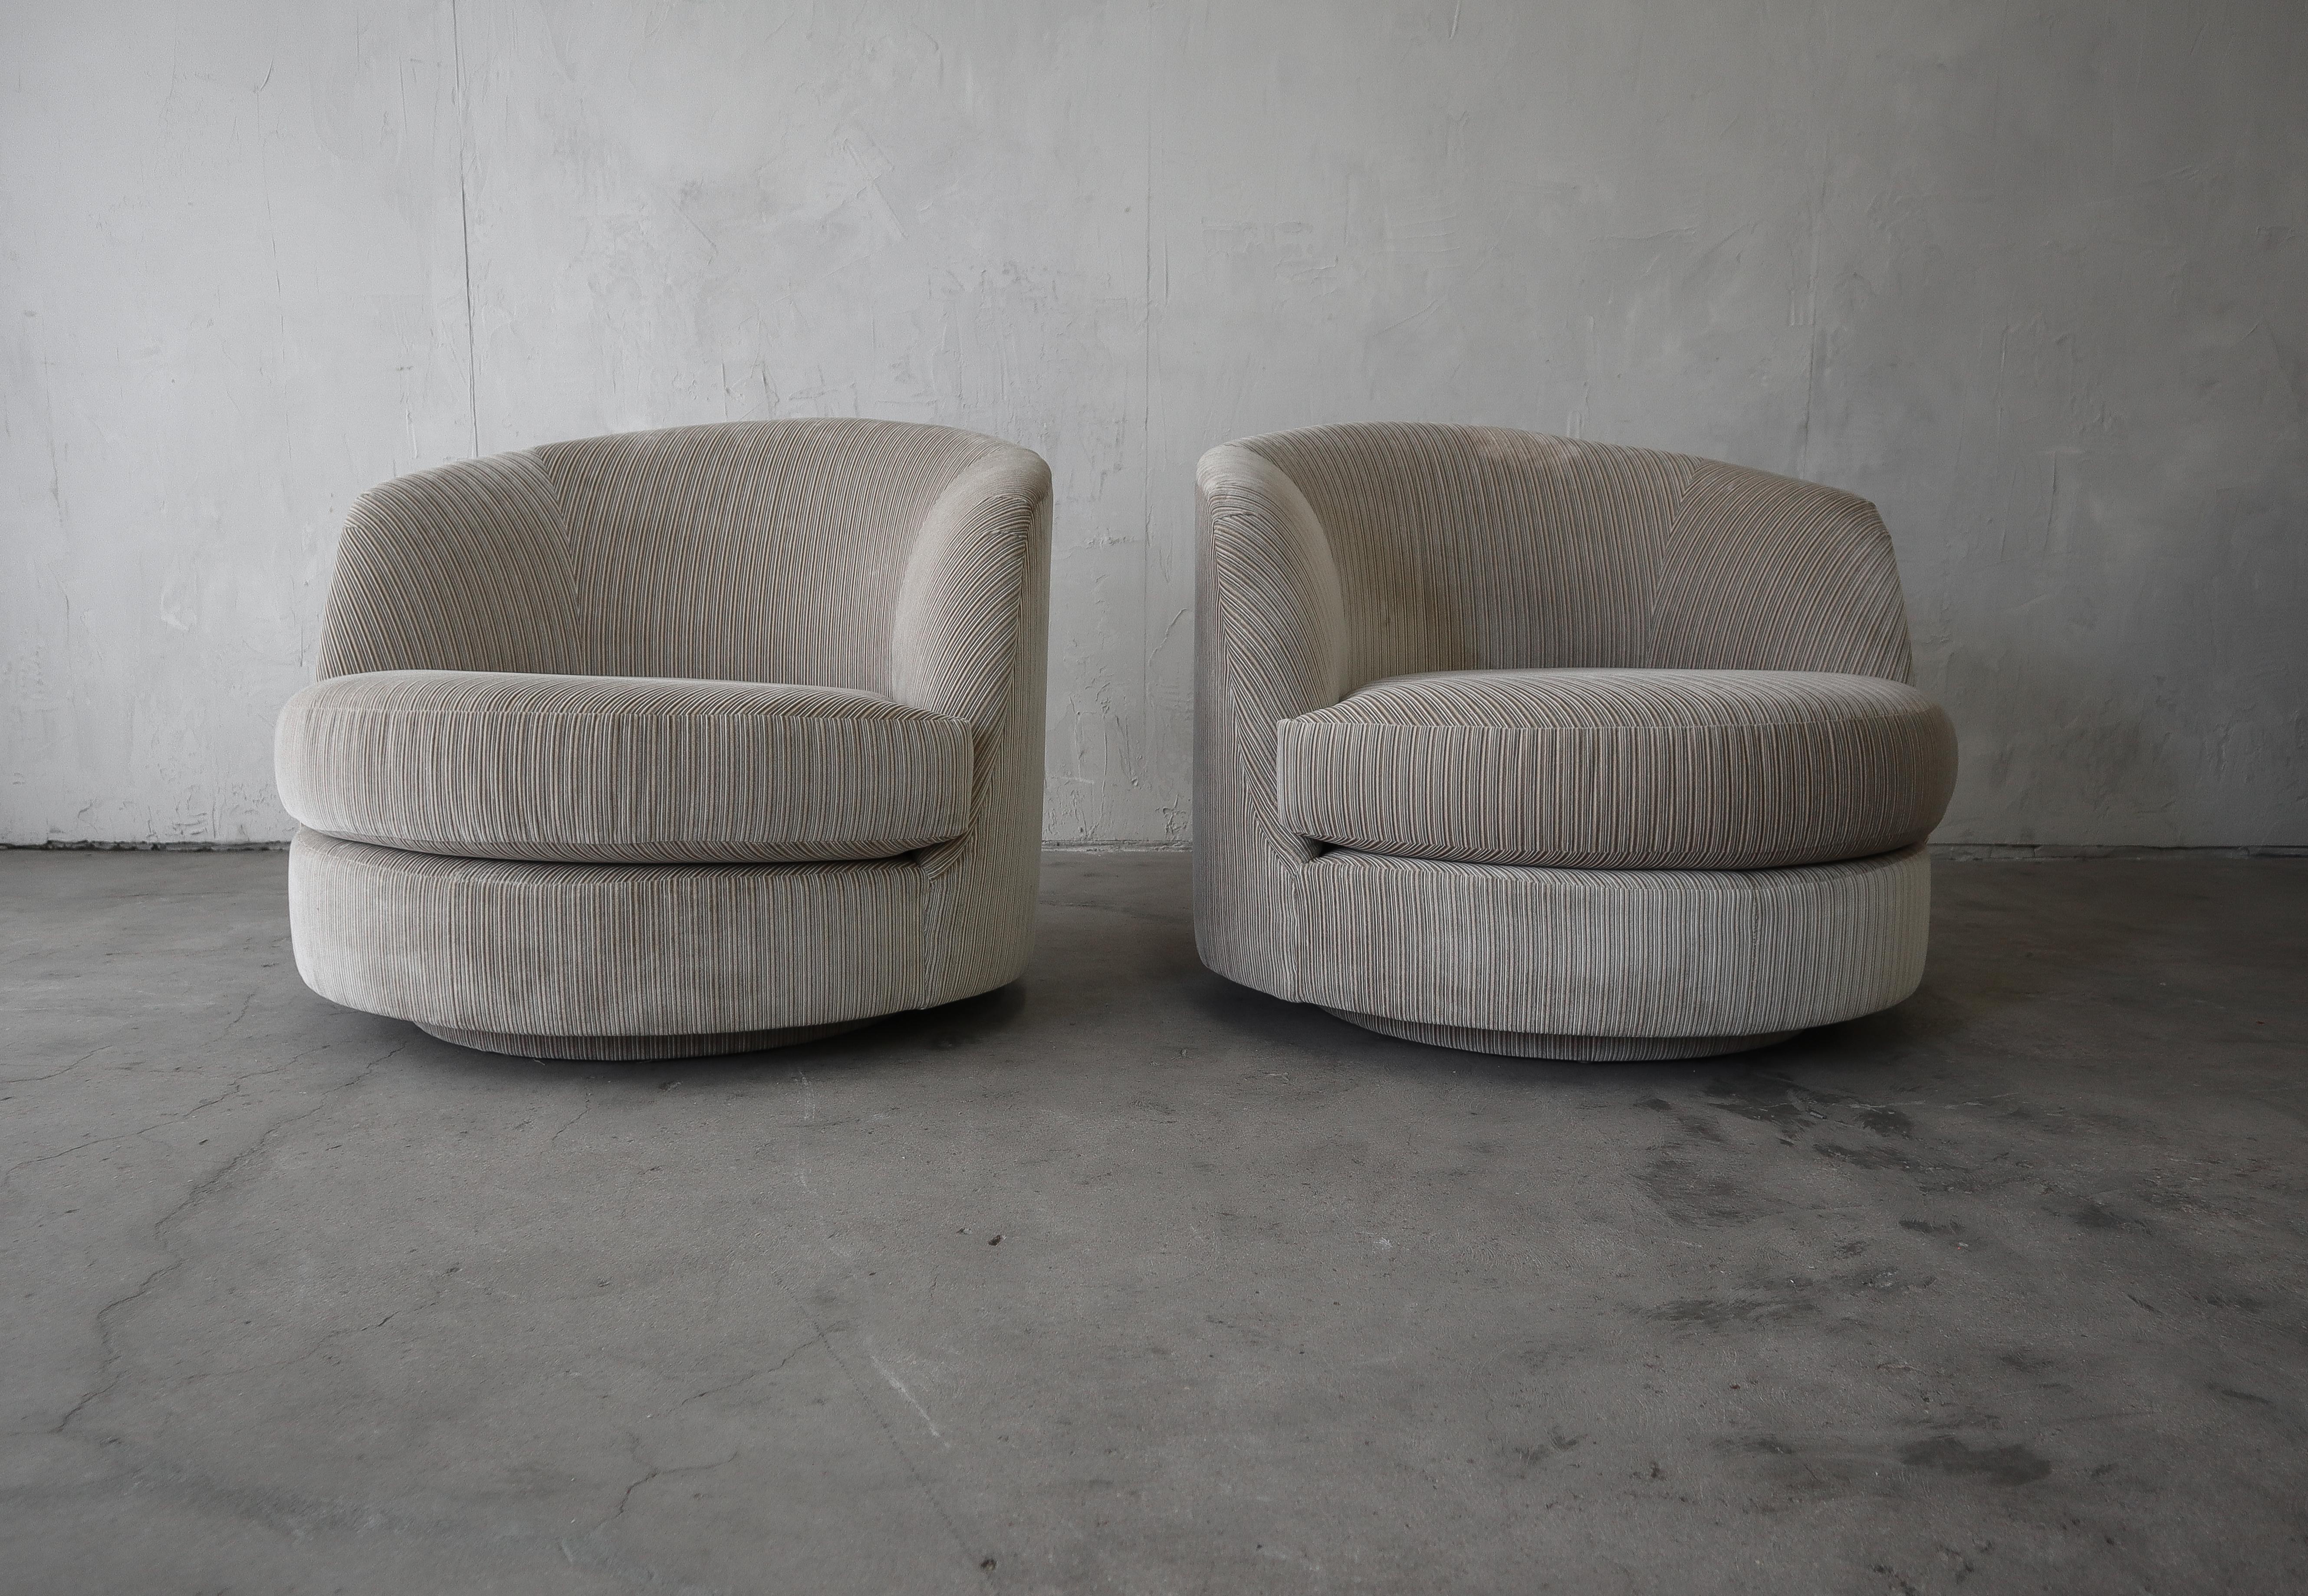 Nice pair of oversized midcentury swivel barrel chairs. Chairs swivel on a raised upholstered plinth.

Chairs sold as found and reupholstery is recommended due to a large light spot on the back of one chair, see last image. All mechanism are solid